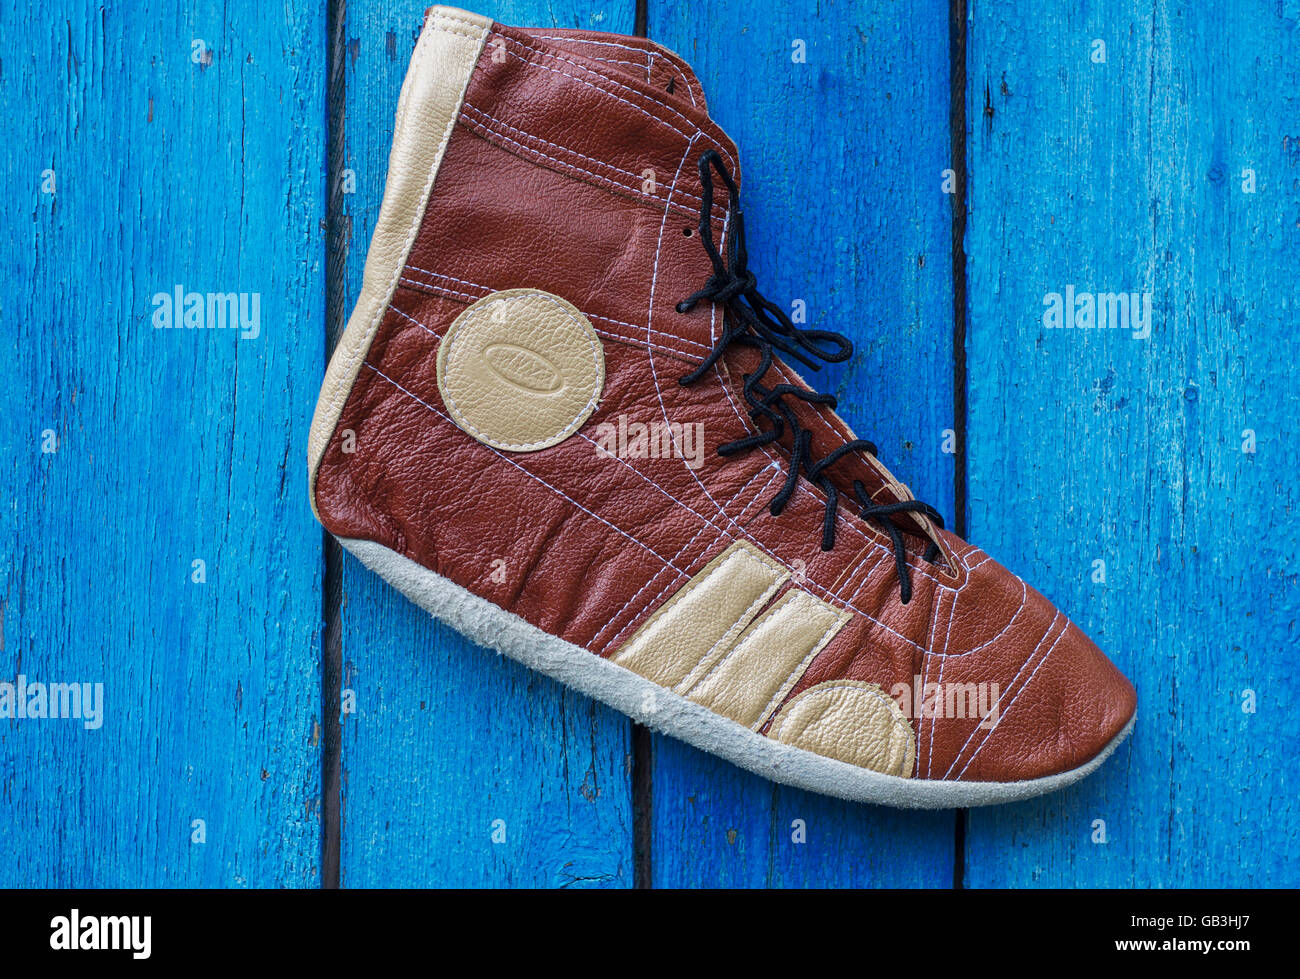 Retro shoes athlete in wrestling, on a wooden blue background Stock Photo